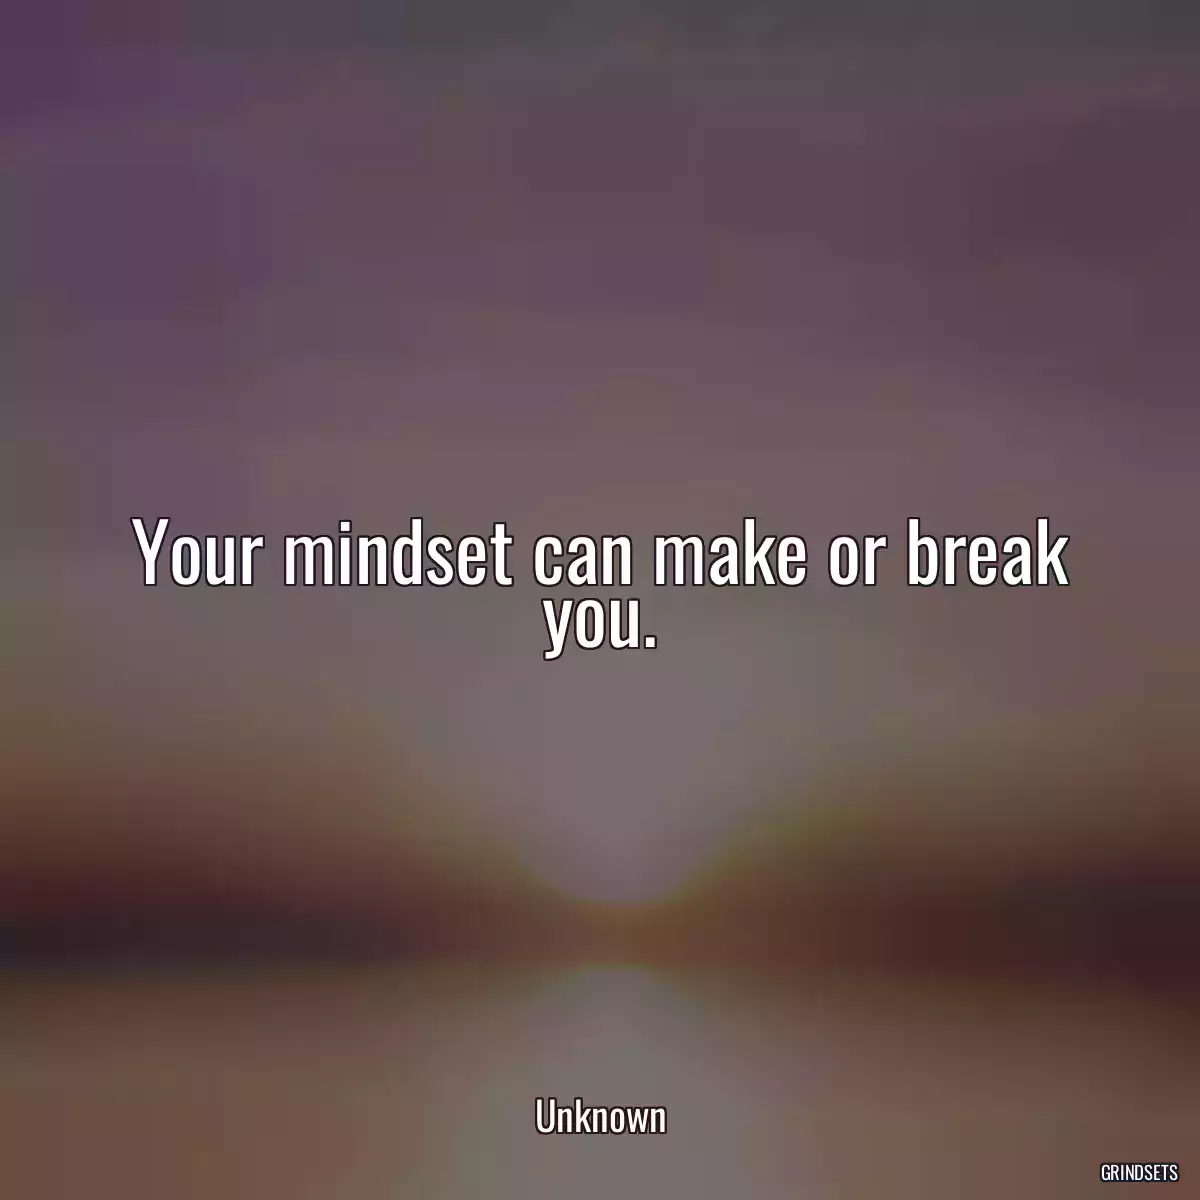 Your mindset can make or break you.